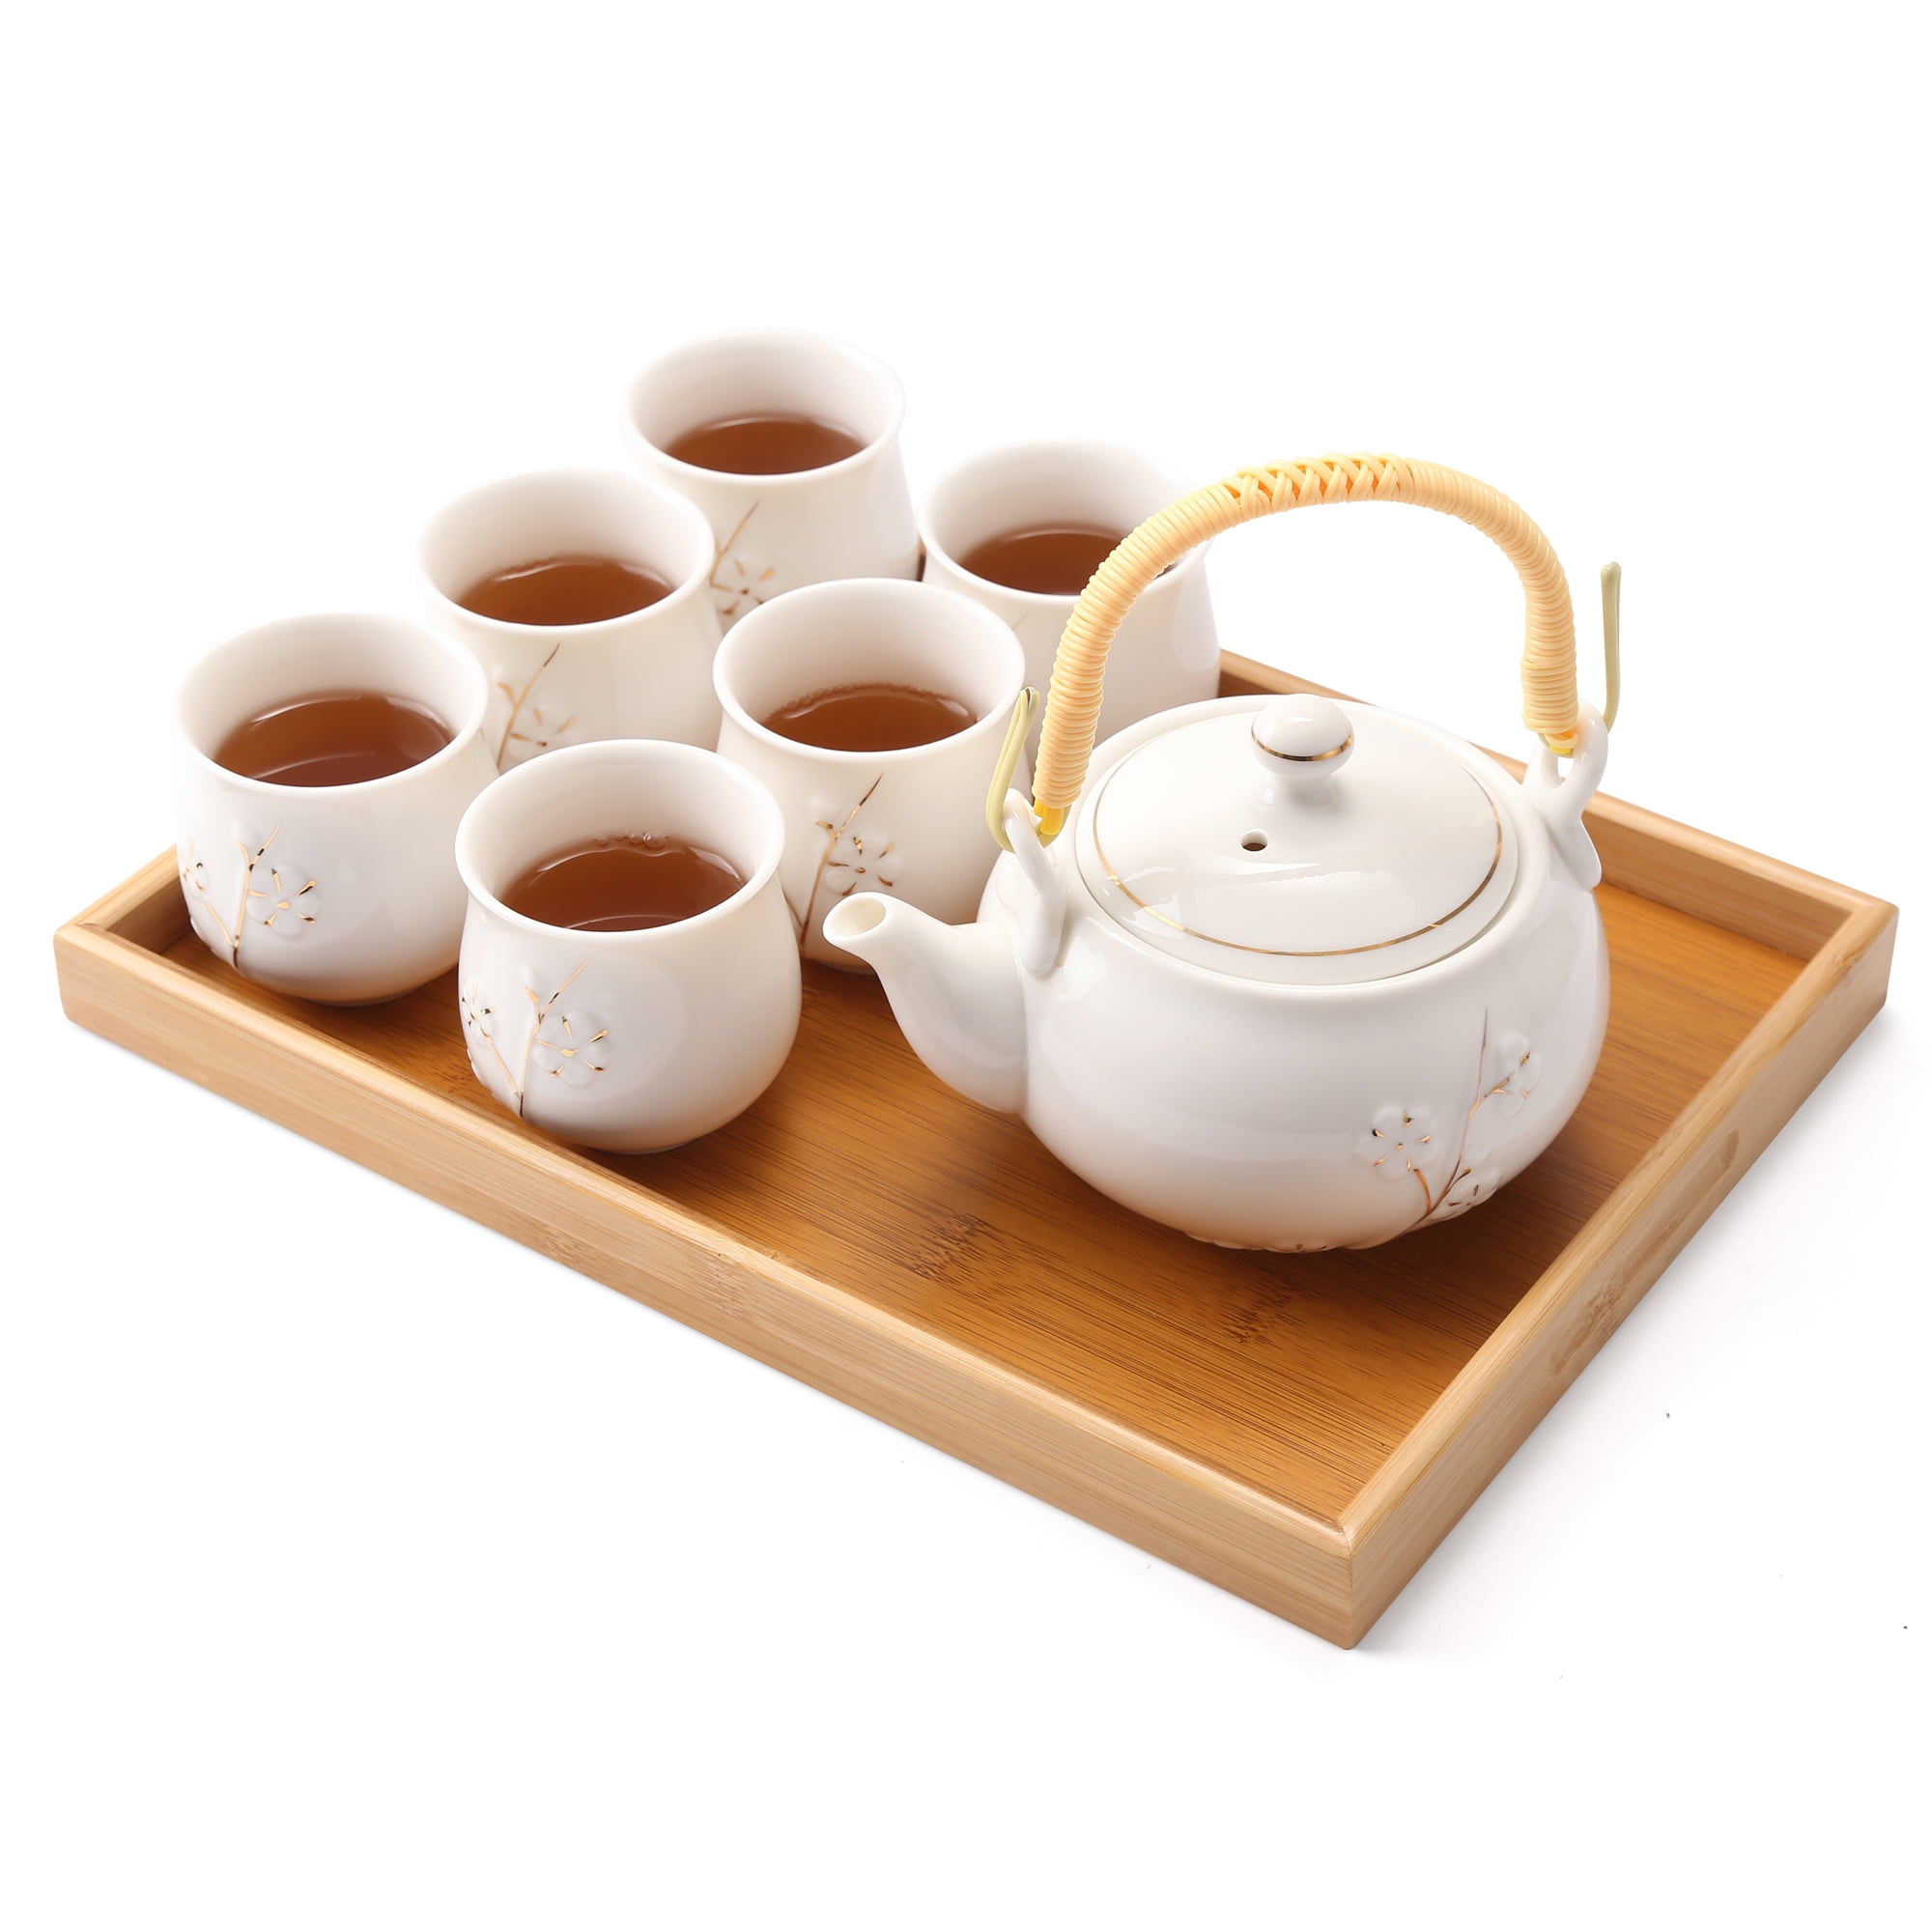 Tea Service Office Home Use Toy Tea Set For Gift ufengke Chinese Ceramic Kung Fu Tea Set With Wooden Tea Tray And Small Tea Tools White 